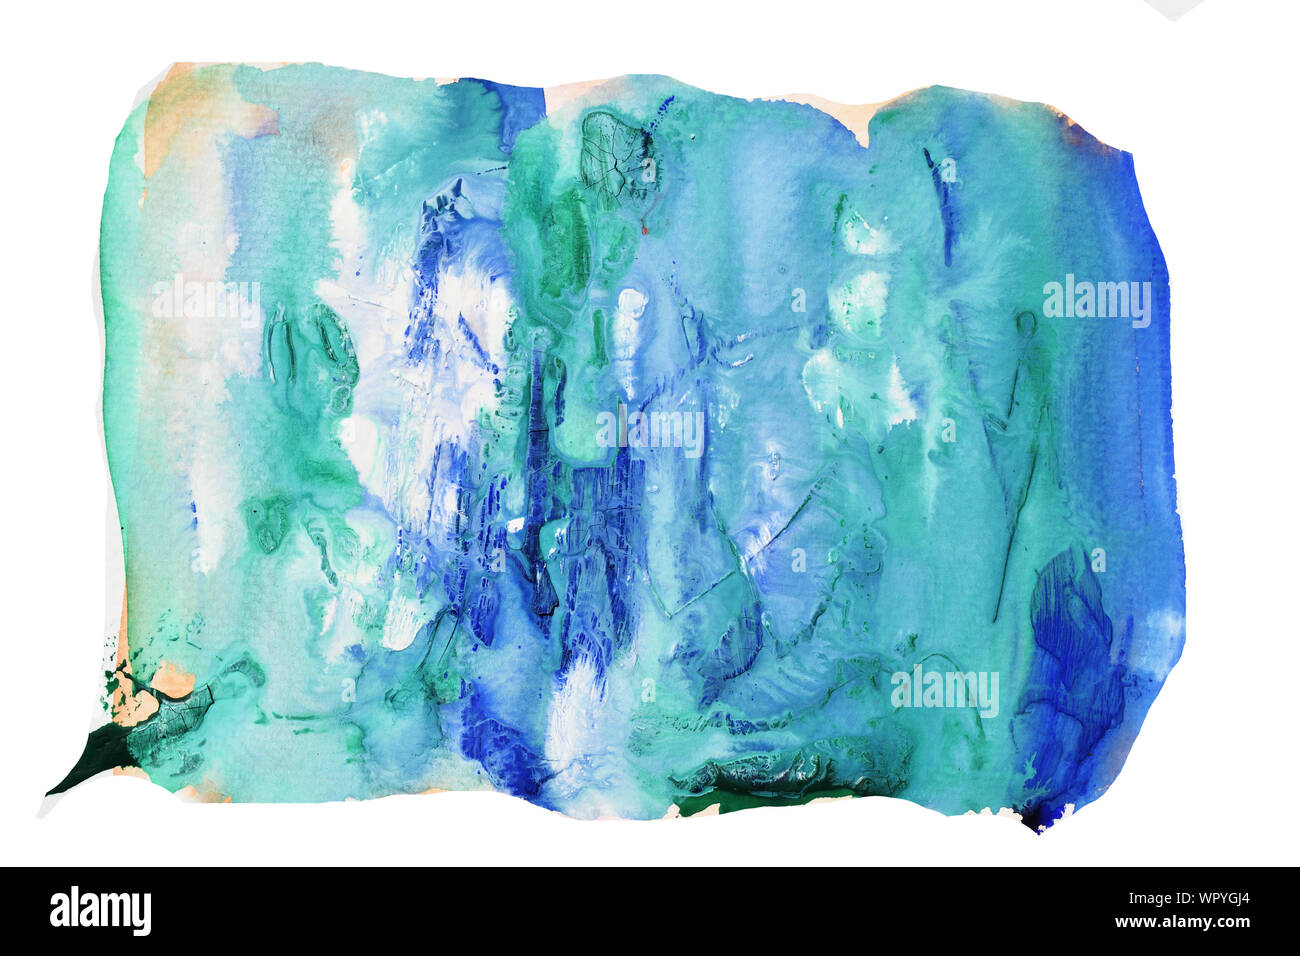 Blue and white stains flow on green surface , Abstract background and illustration from acrylic color painting Stock Photo